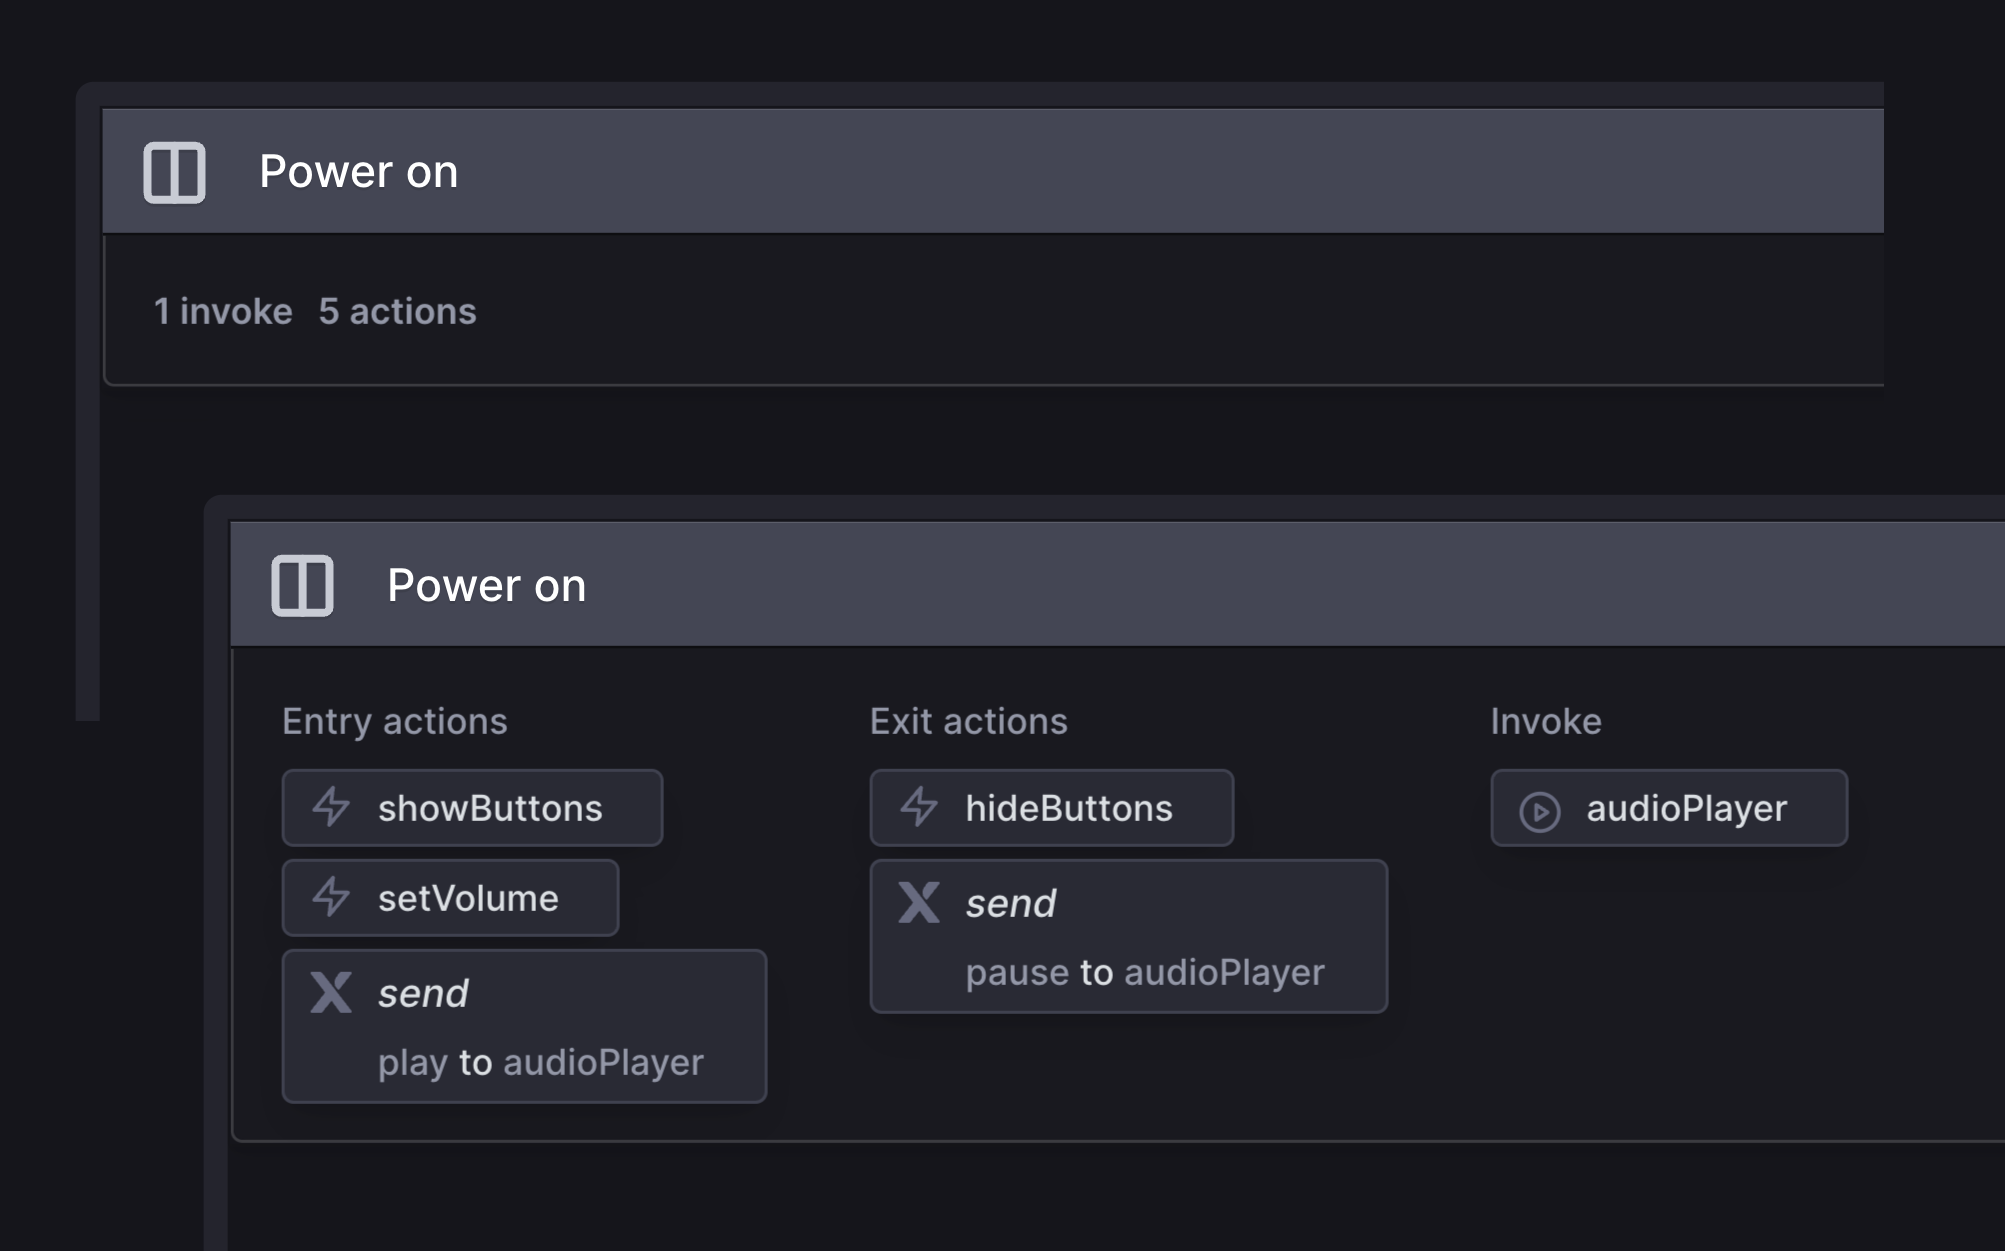 The Power on state. When effects are shown, you can see Entry actions for showButtons, setVolume, and send play to audioPlayer, Exit actions for hideButtons and send pause to audioPlayer, and an invoke for the audioPlayer actor. When effects are hidden you only see a summary of 1 invoke and 5 actions.